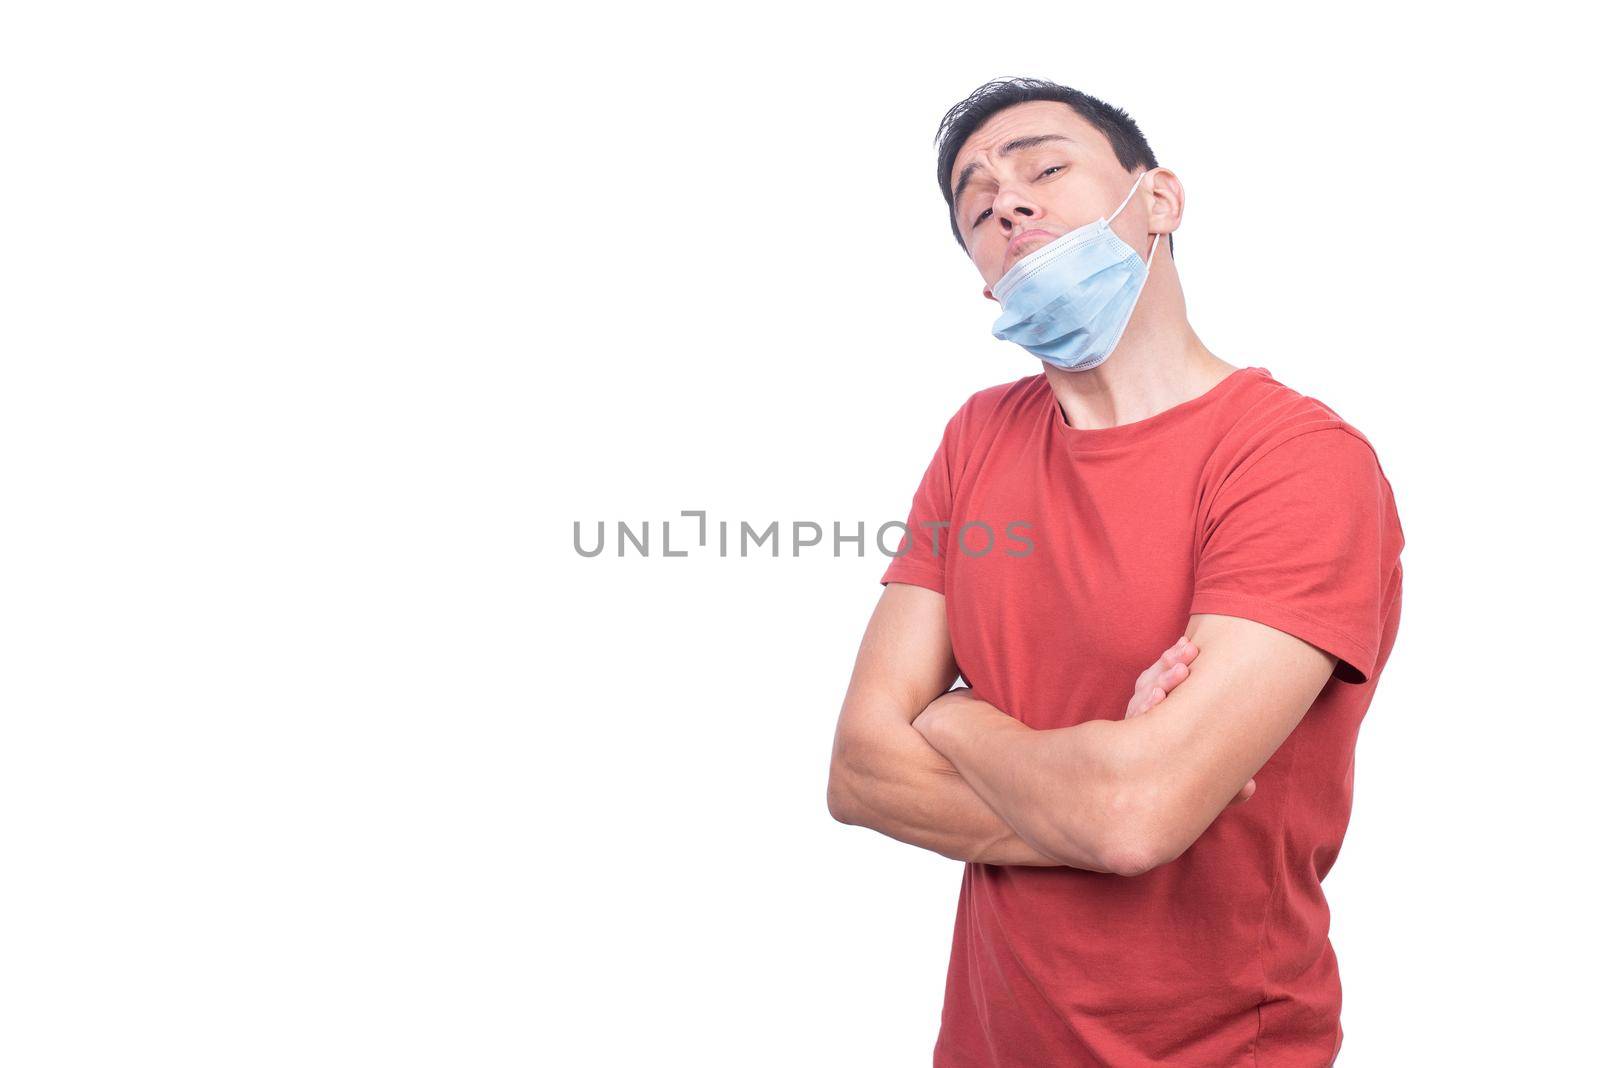 Reckless man with misplaced protective mask looking at camera with crossed arms during coronavirus pandemic isolated on white background in studio